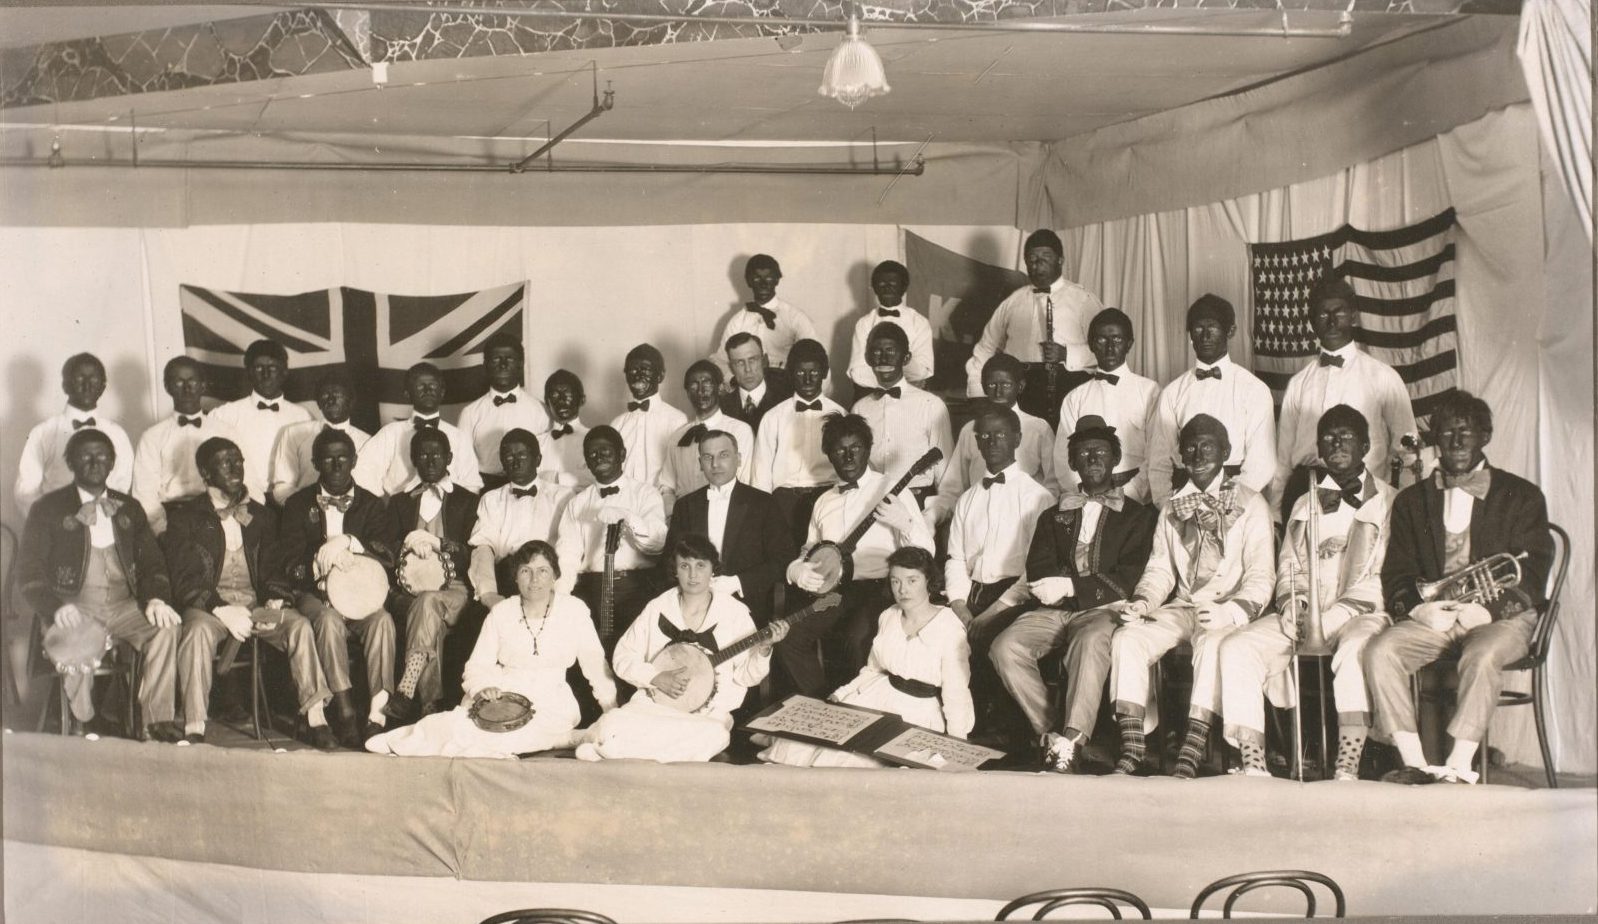 Item is a group portrait of a minstel show cast, post on stage, most of whom are white performers in blackface.